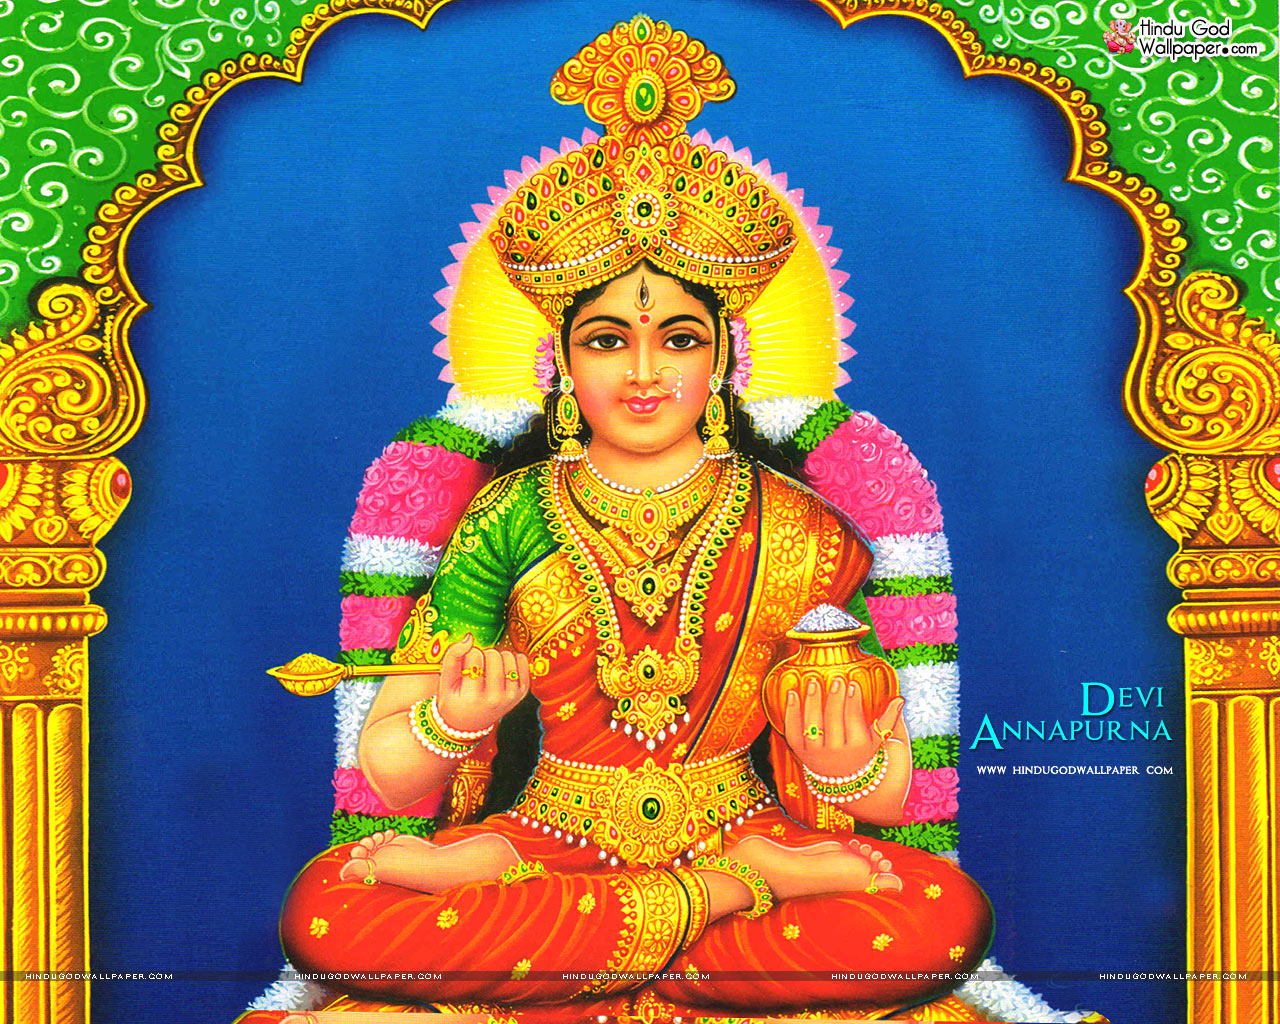 Annapurna Devi Wallpapers, Images & Pics Free Download